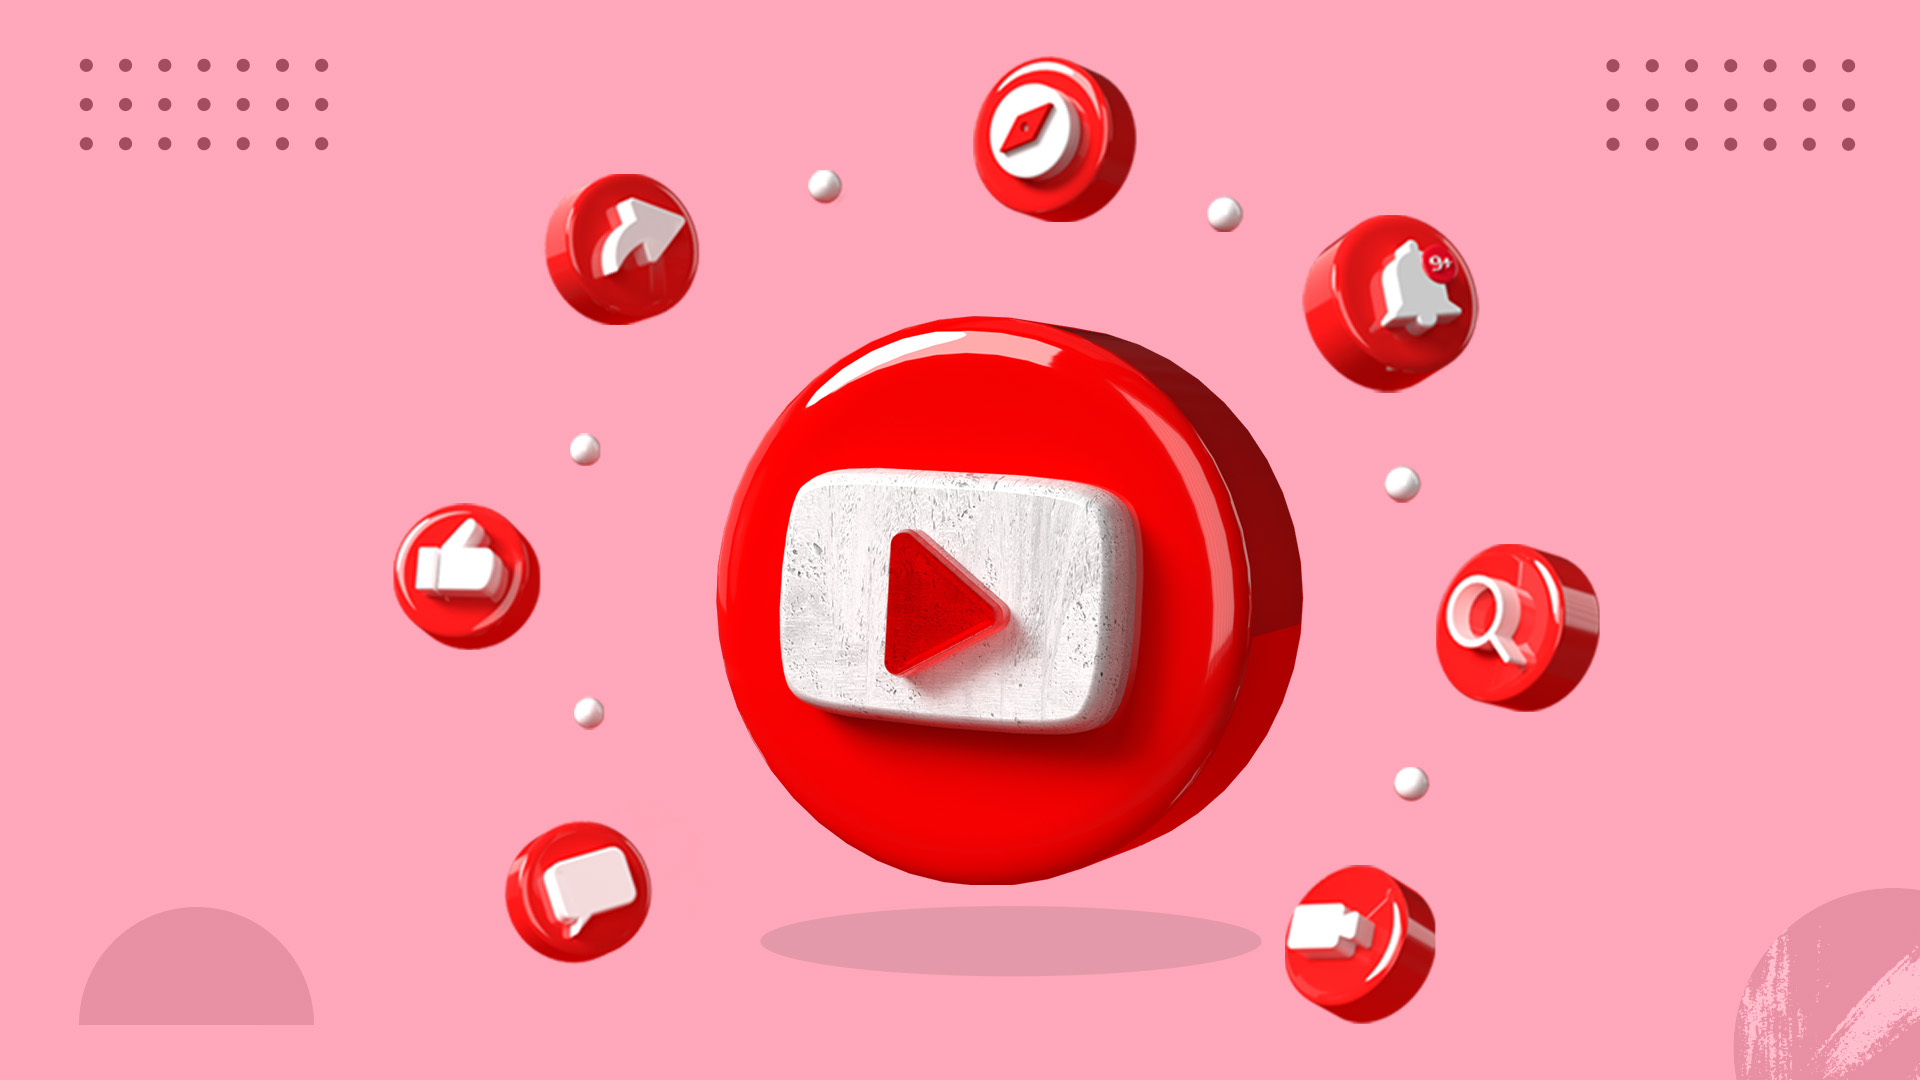 15 Best YouTube Automation Tools to Grow Your Channel in 2022